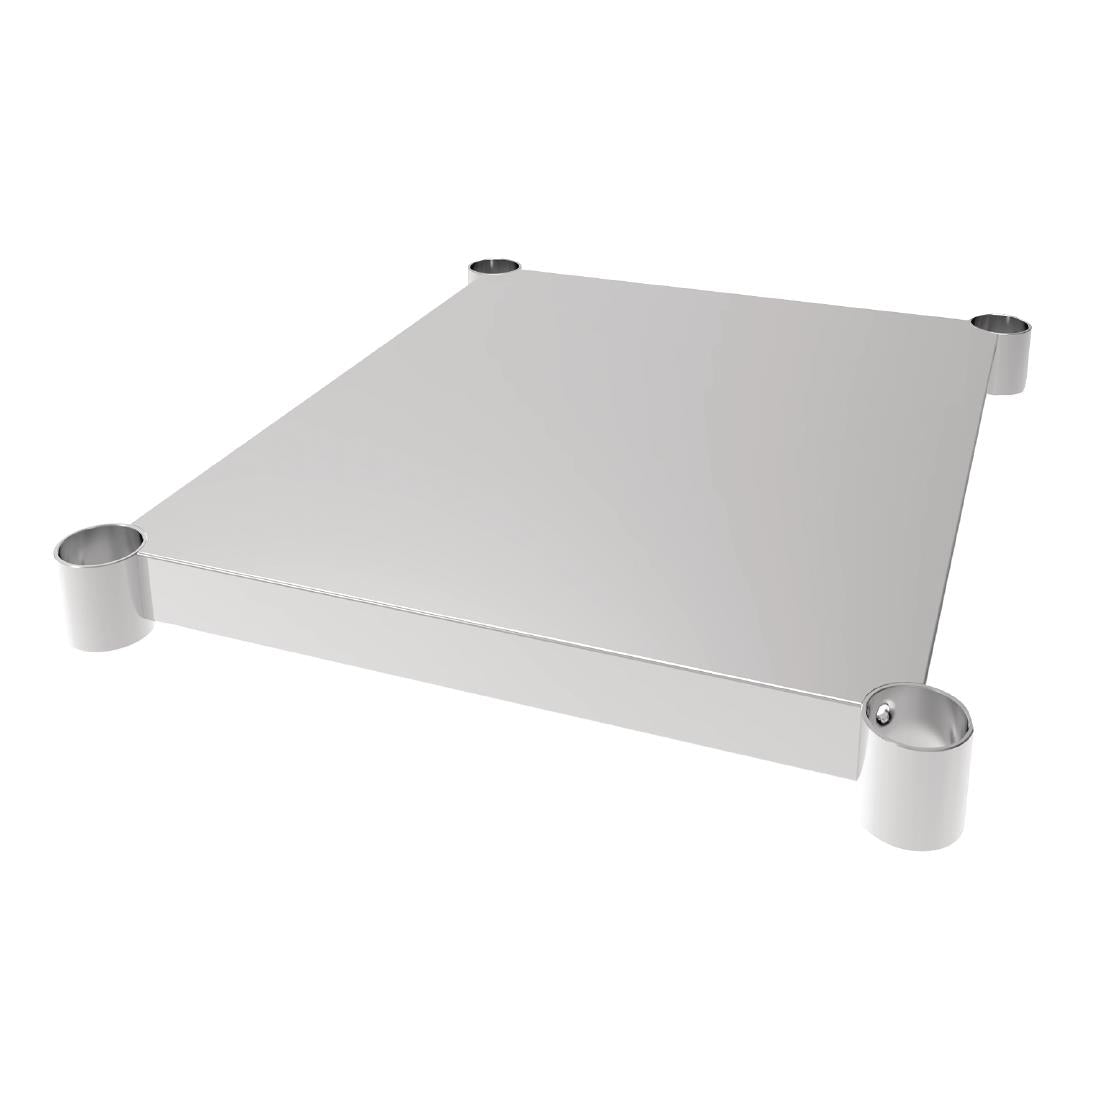 CP835 Vogue Steel Table Shelf 600x700mm JD Catering Equipment Solutions Ltd